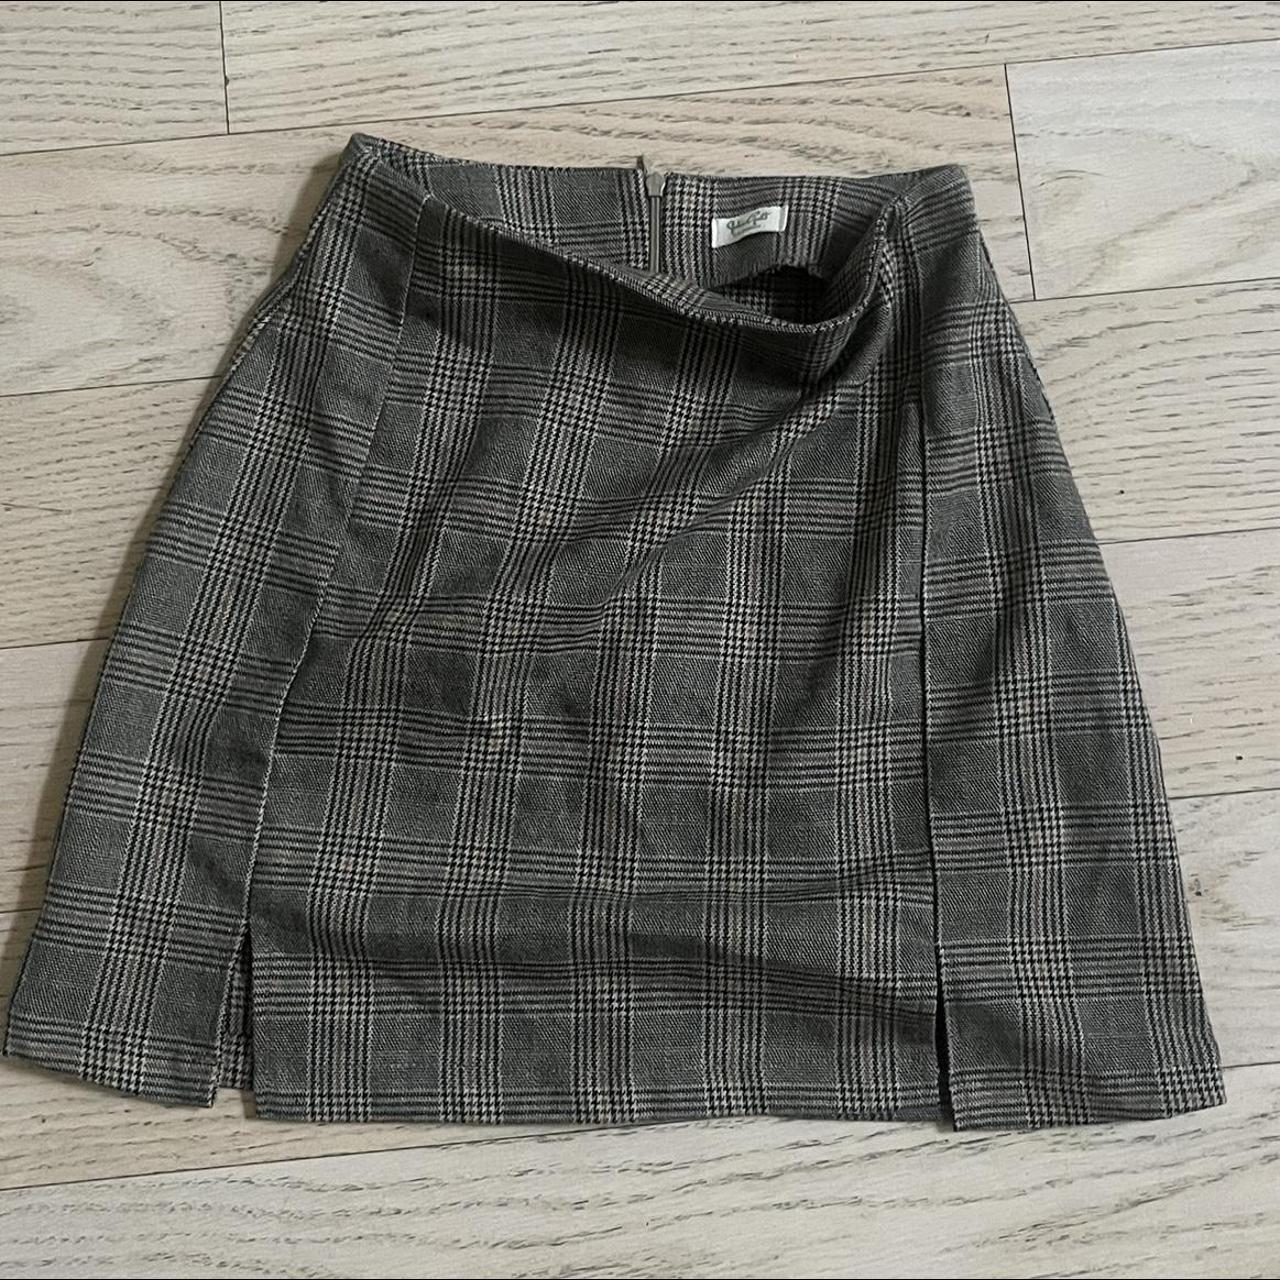 glowny FW 23 Russell plaid mini skirt in brown and... - Depop